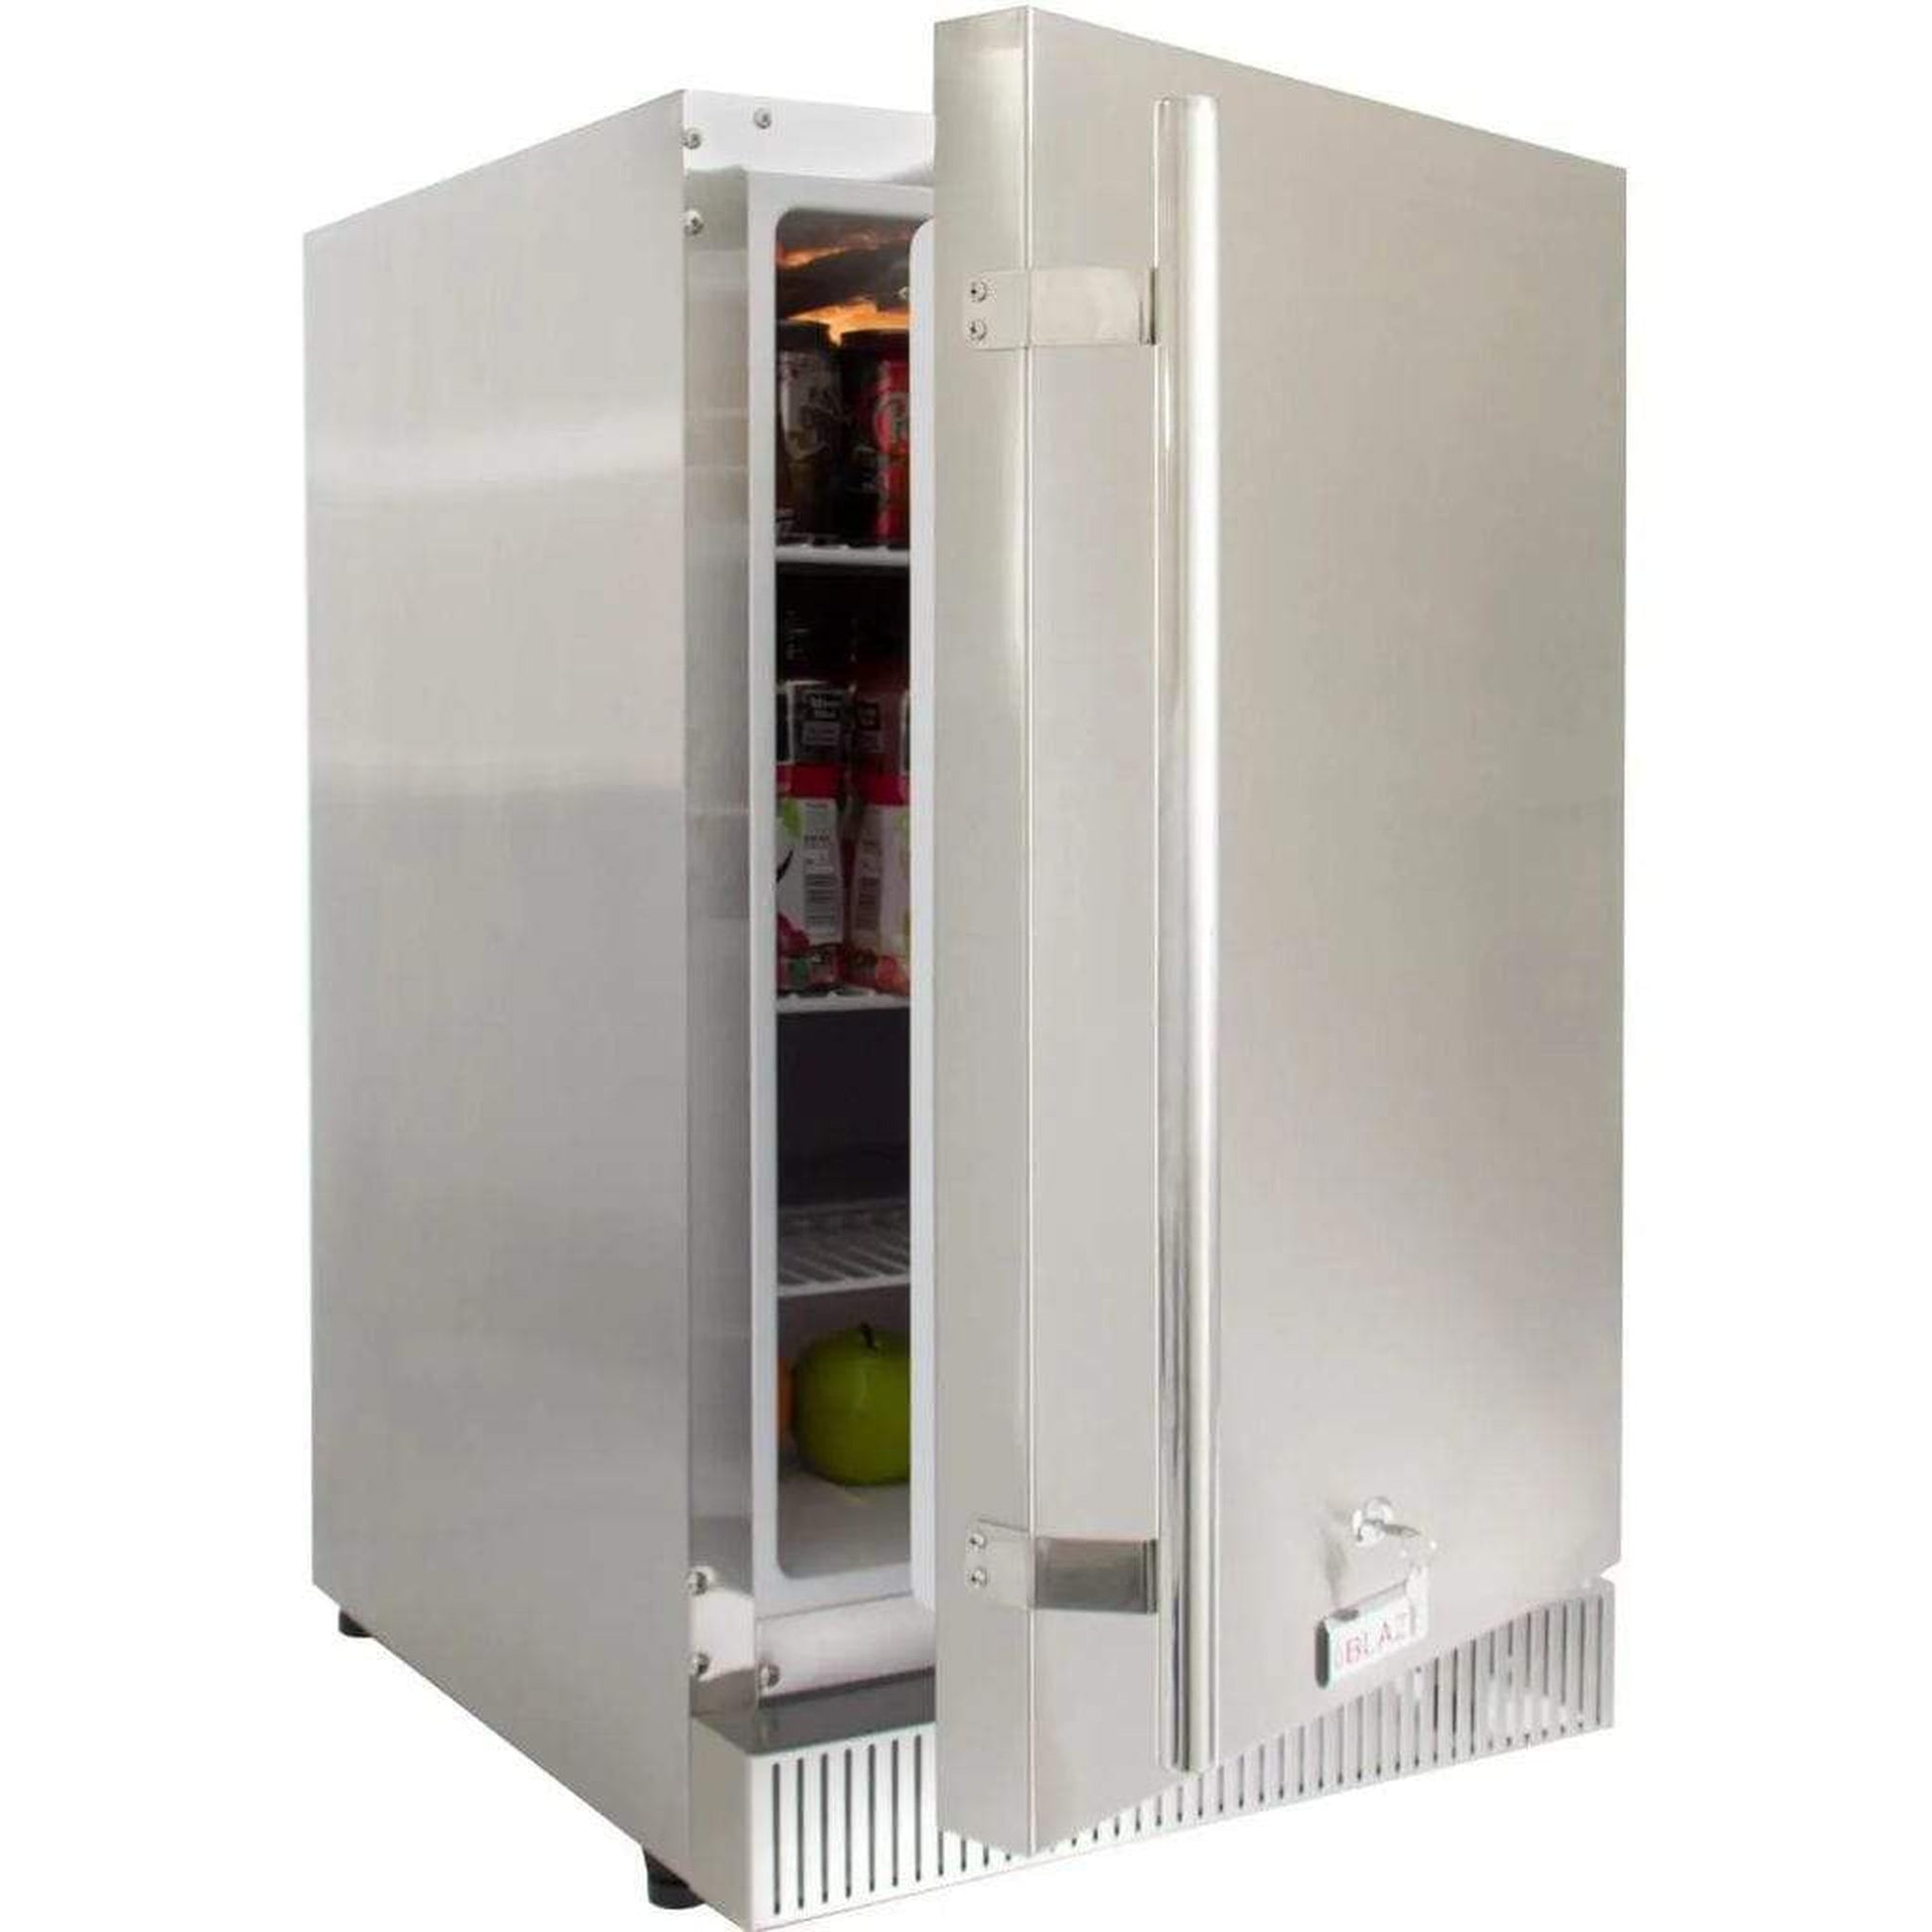 Blaze 20" Outdoor Rated Stainless Steel Compact Refrigerator 4.1 Cu. Ft.